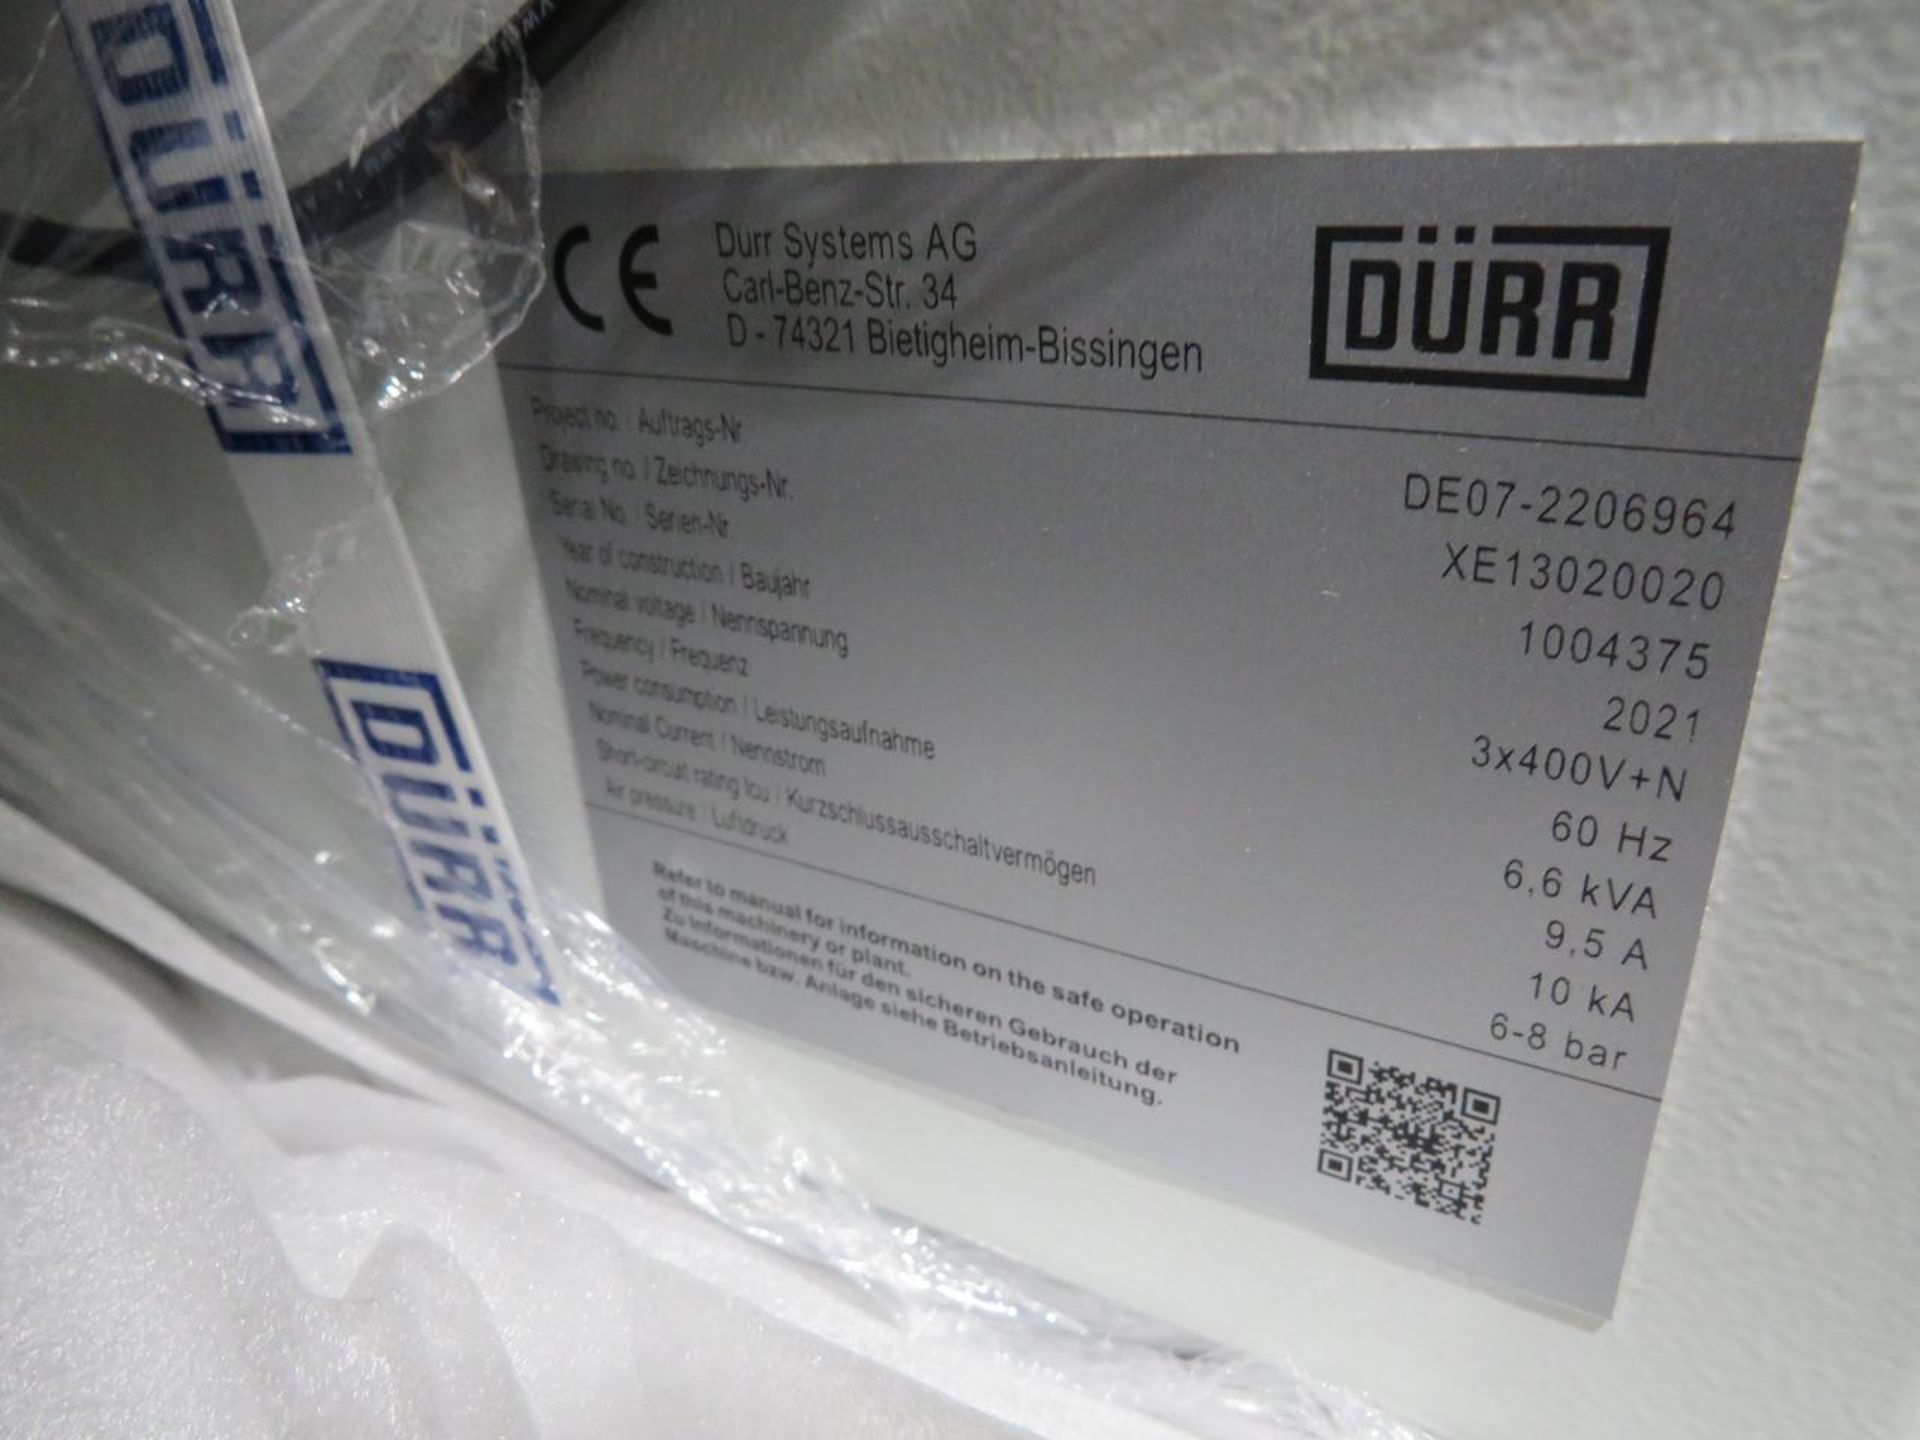 2021 Durr Adhesive Application System - Image 17 of 31